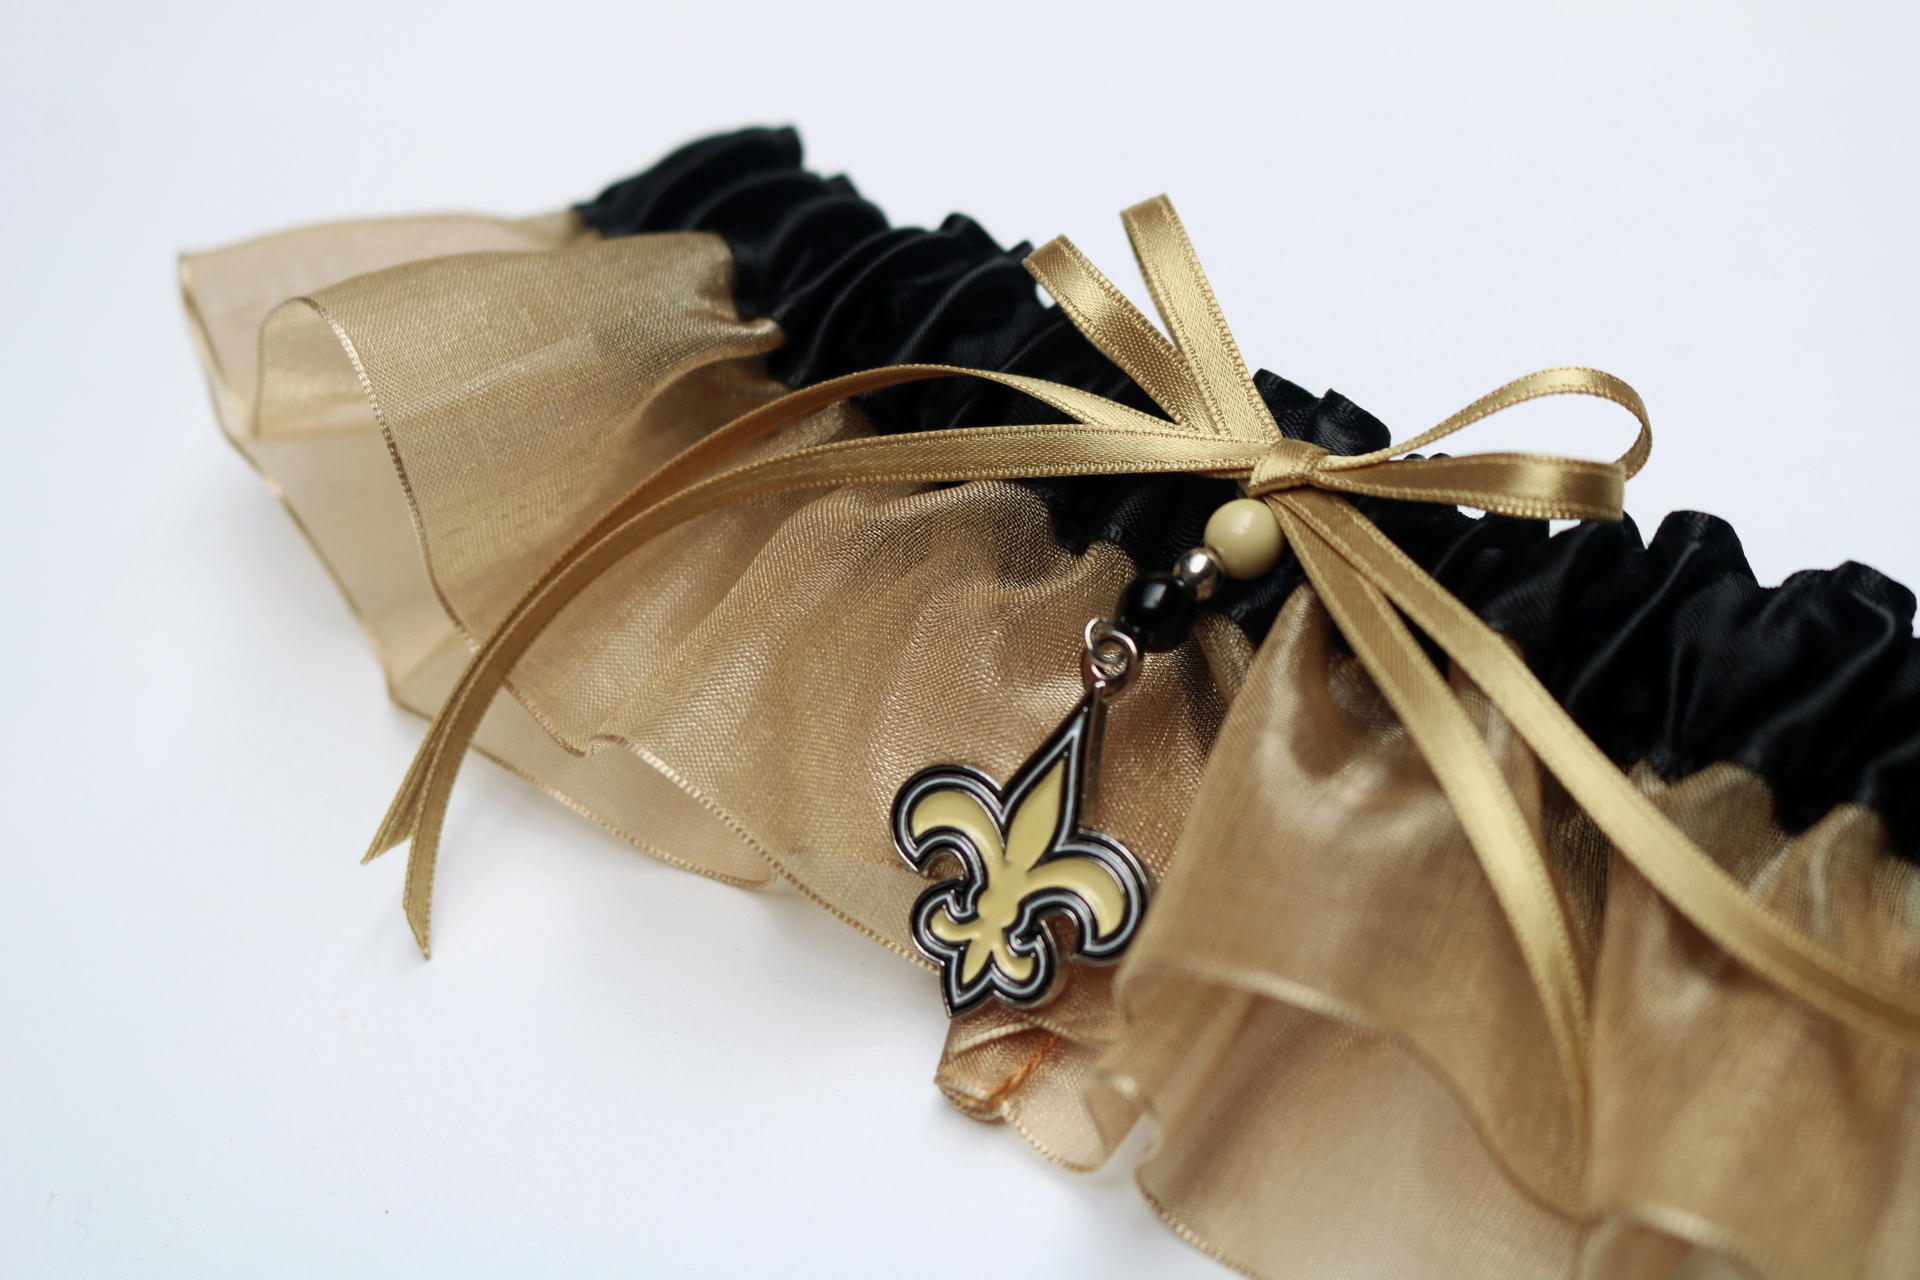 New Orleans Saints Inspired Garter with Licensed Charm